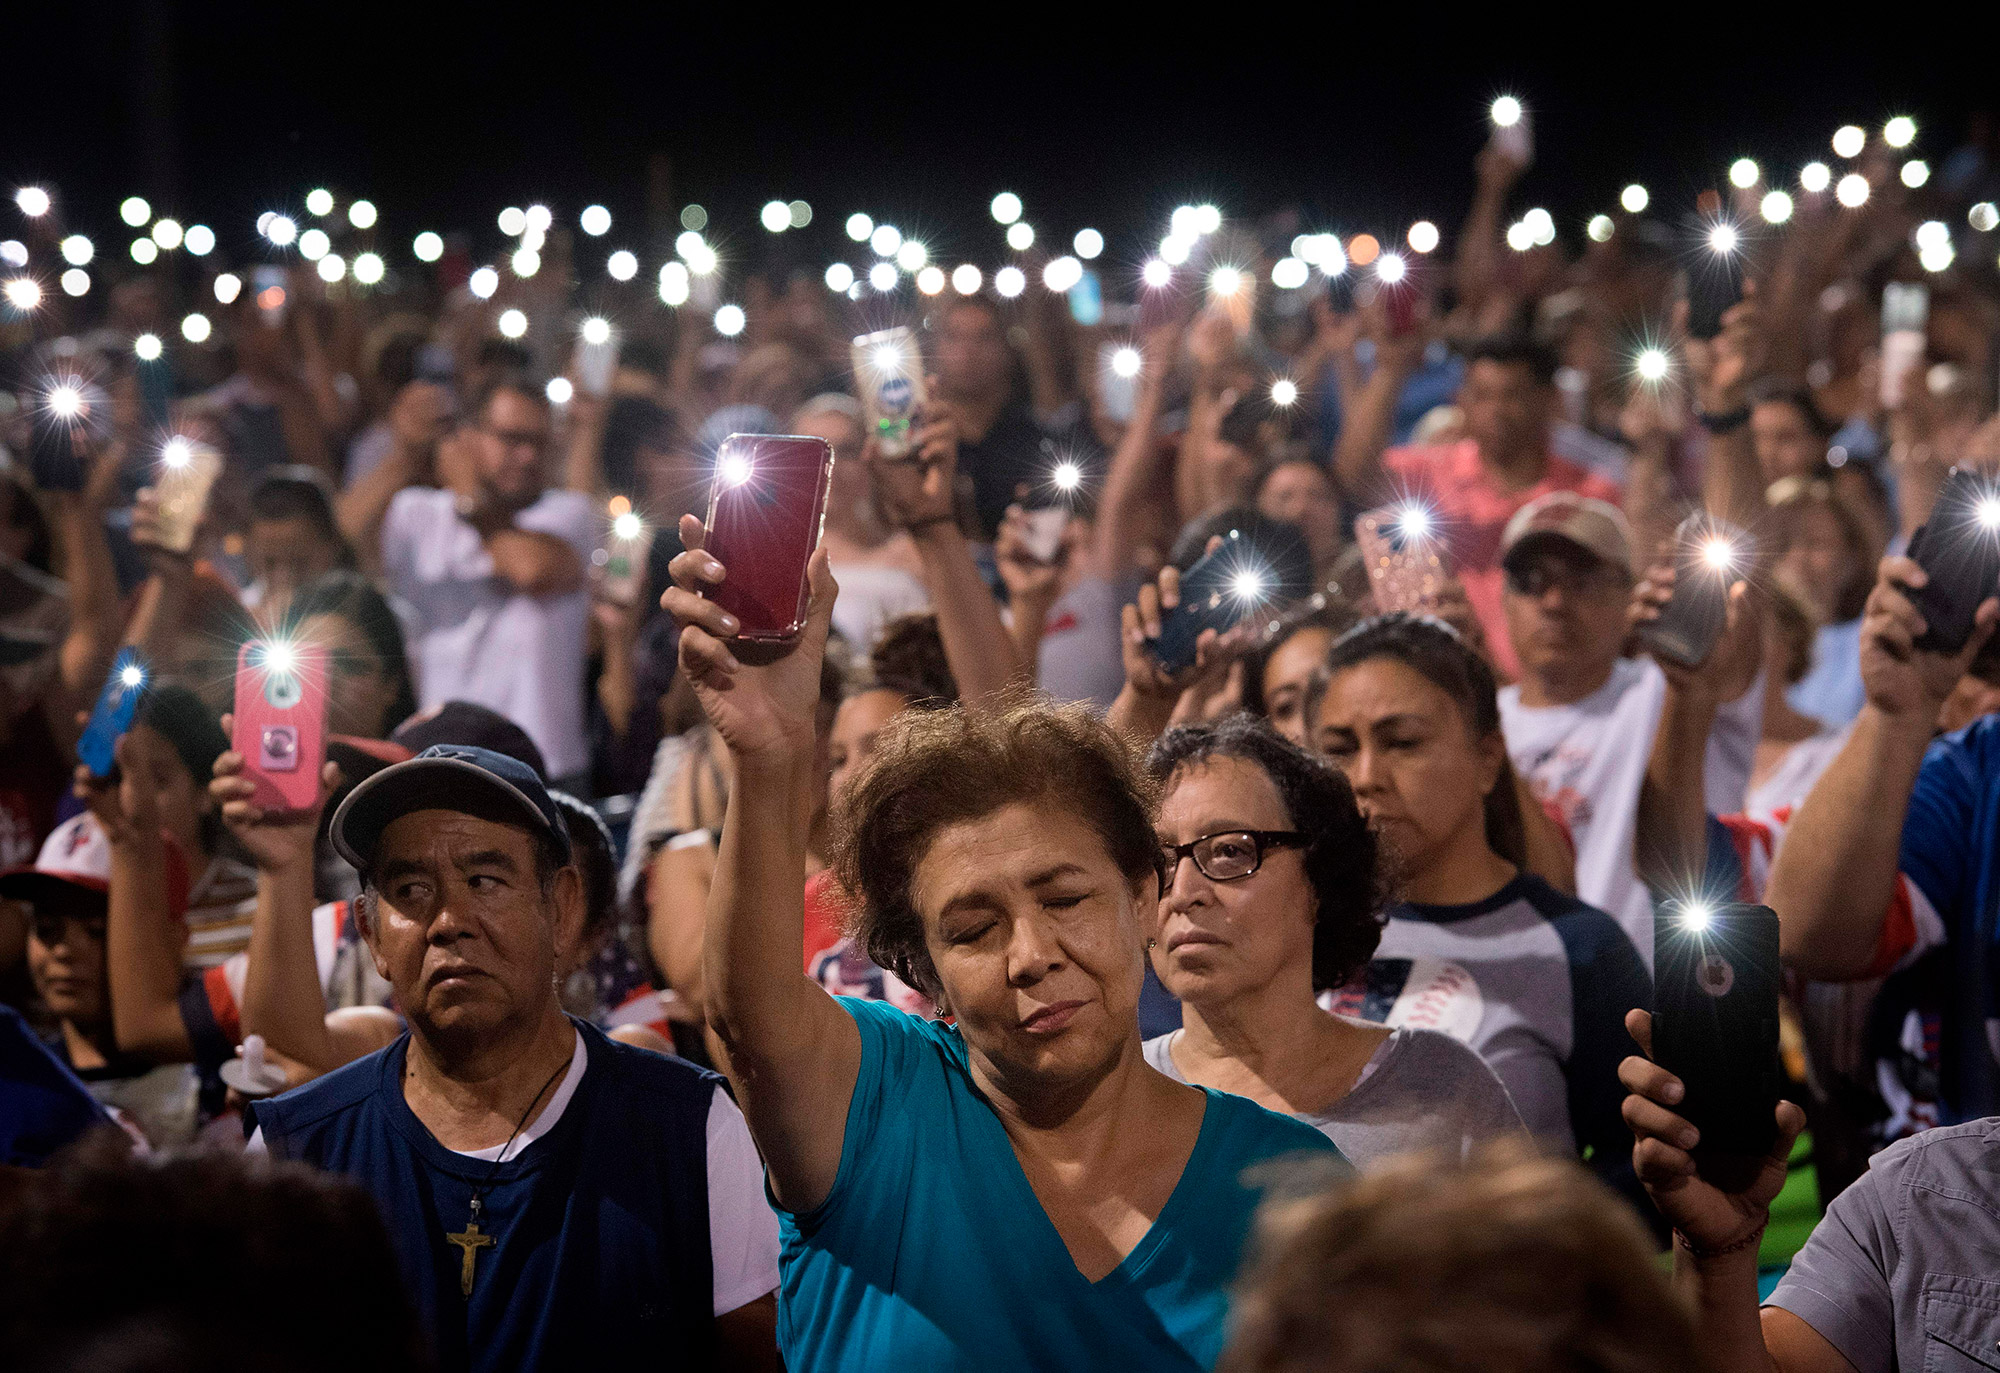 El Paso Shooting: Death Toll Rises After Weekend Massacre - Bloomberg